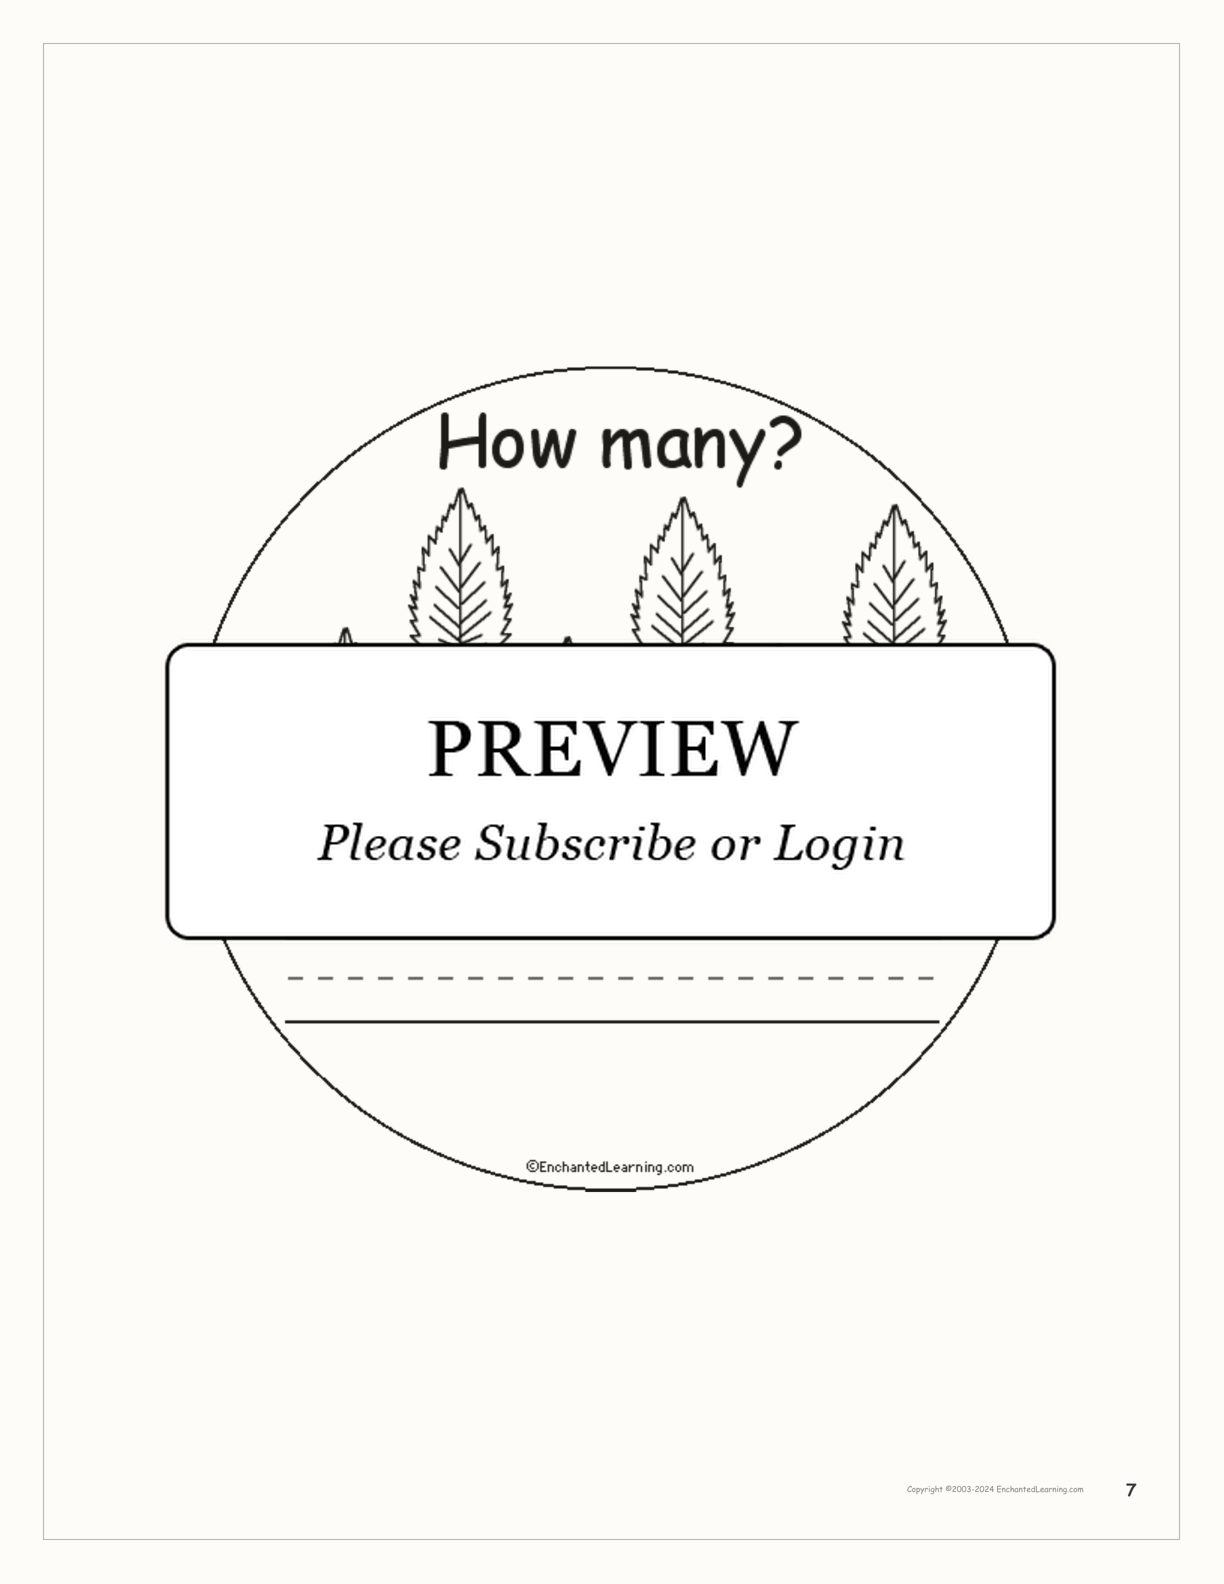 How Many Leaves? interactive printout page 7